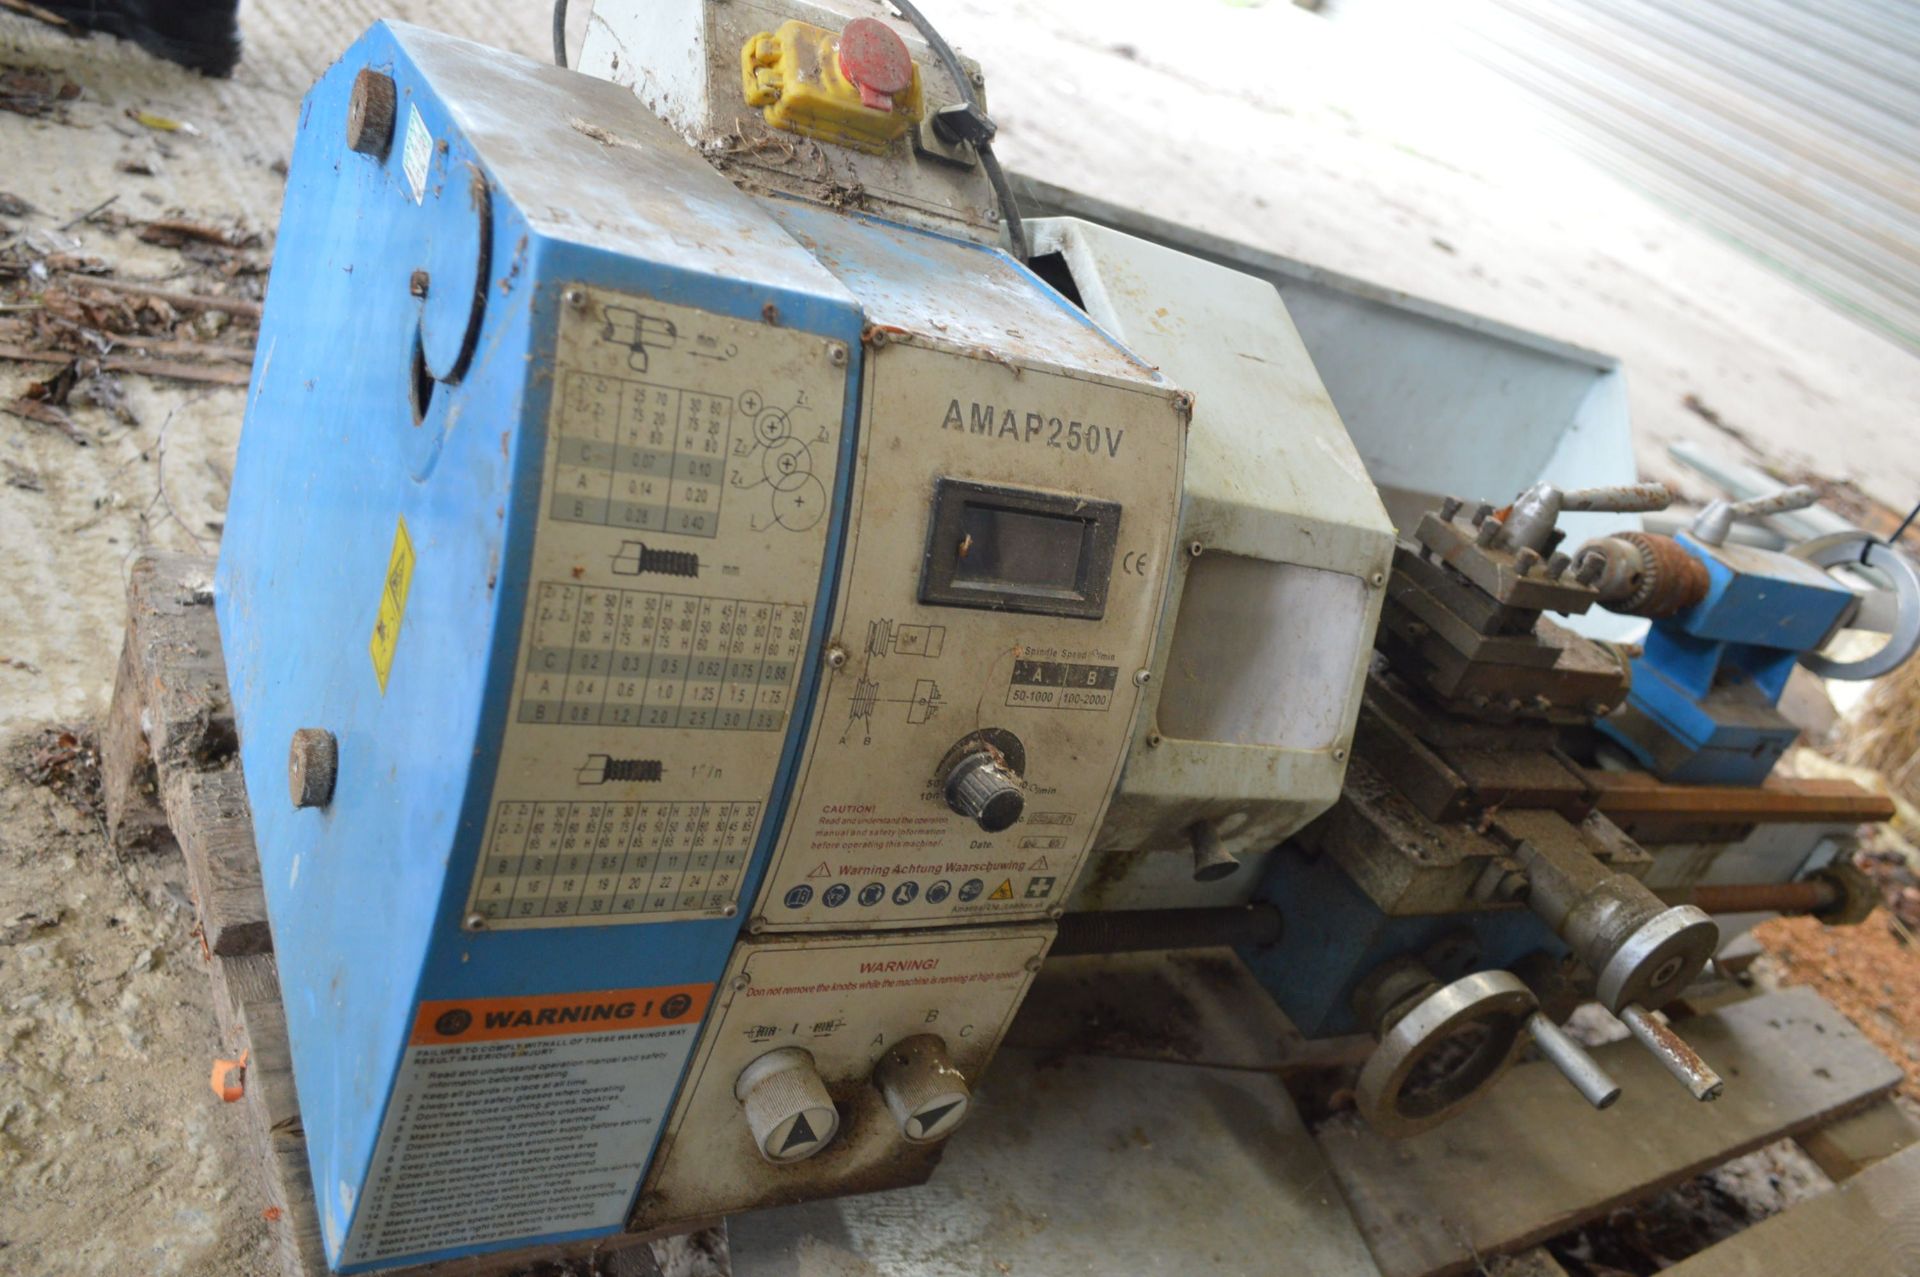 AMAP250V Bench Lathe, approx. 250mm swing x 500mm between centres, 240V - Image 3 of 3